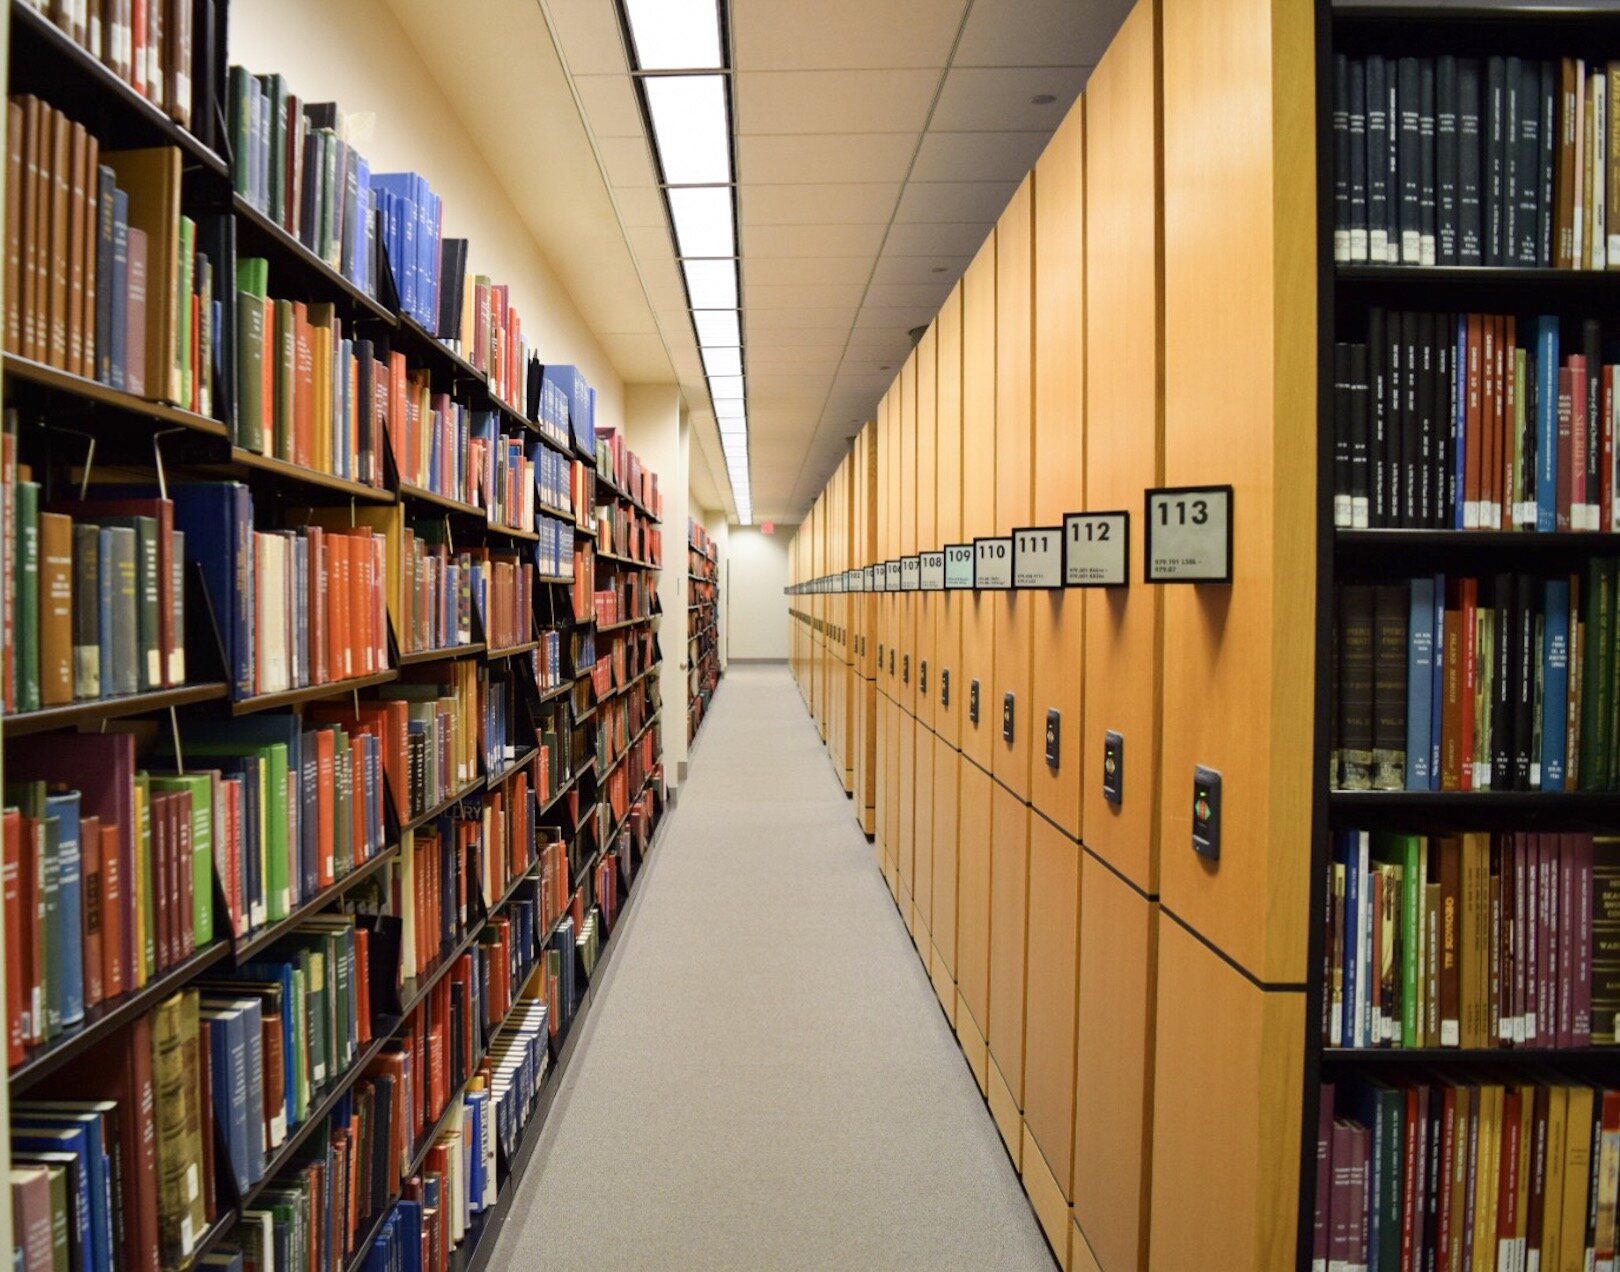 West stacks of research books at the Allen County Public Library's Genealogy Center.